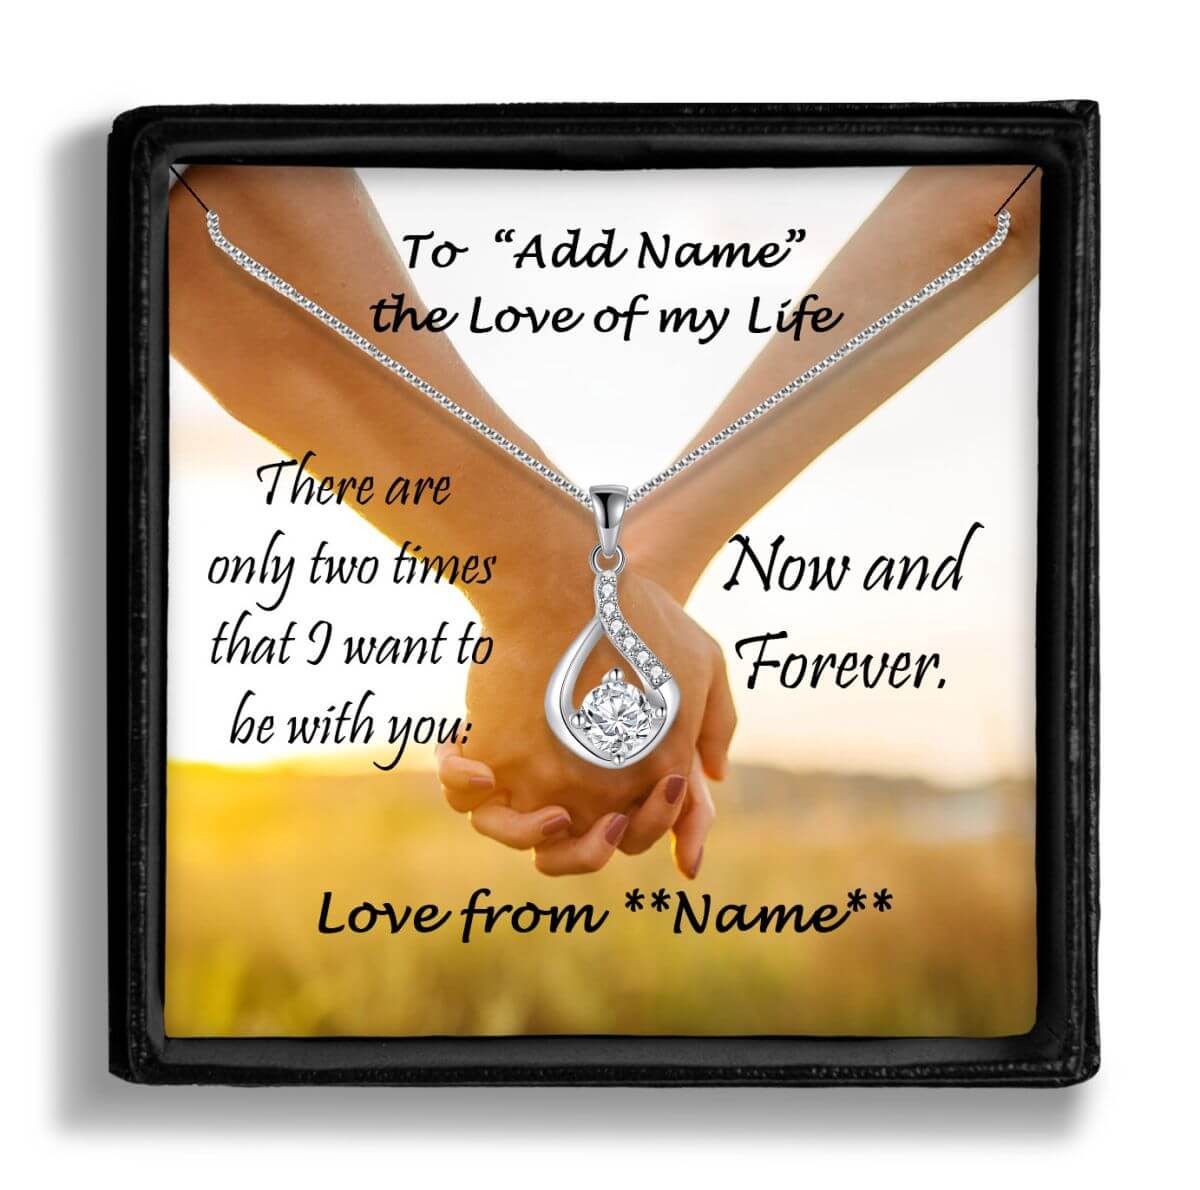 Necklace-Box-Love-Drop-Love-of-My-Life-personalised-BIG-ON-Jewellery-BIG-ON-Necklaces